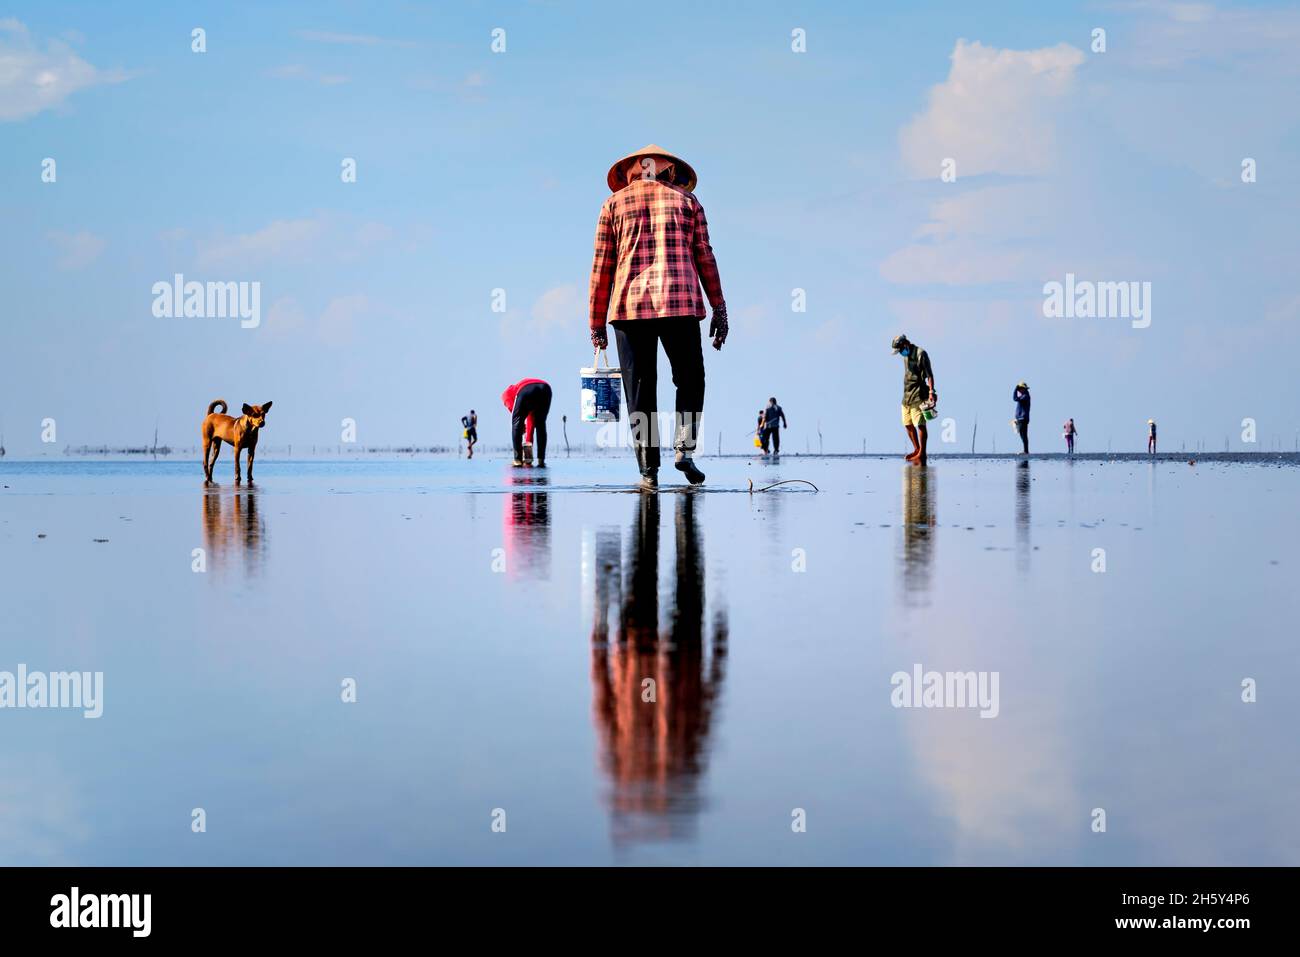 Can Gio District, Ho Chi Minh City, Vietnam - October 23, 2021: Fishermen harvest clams on the beach at low tide in Can Gio district, HCMC, Vietnam Stock Photo